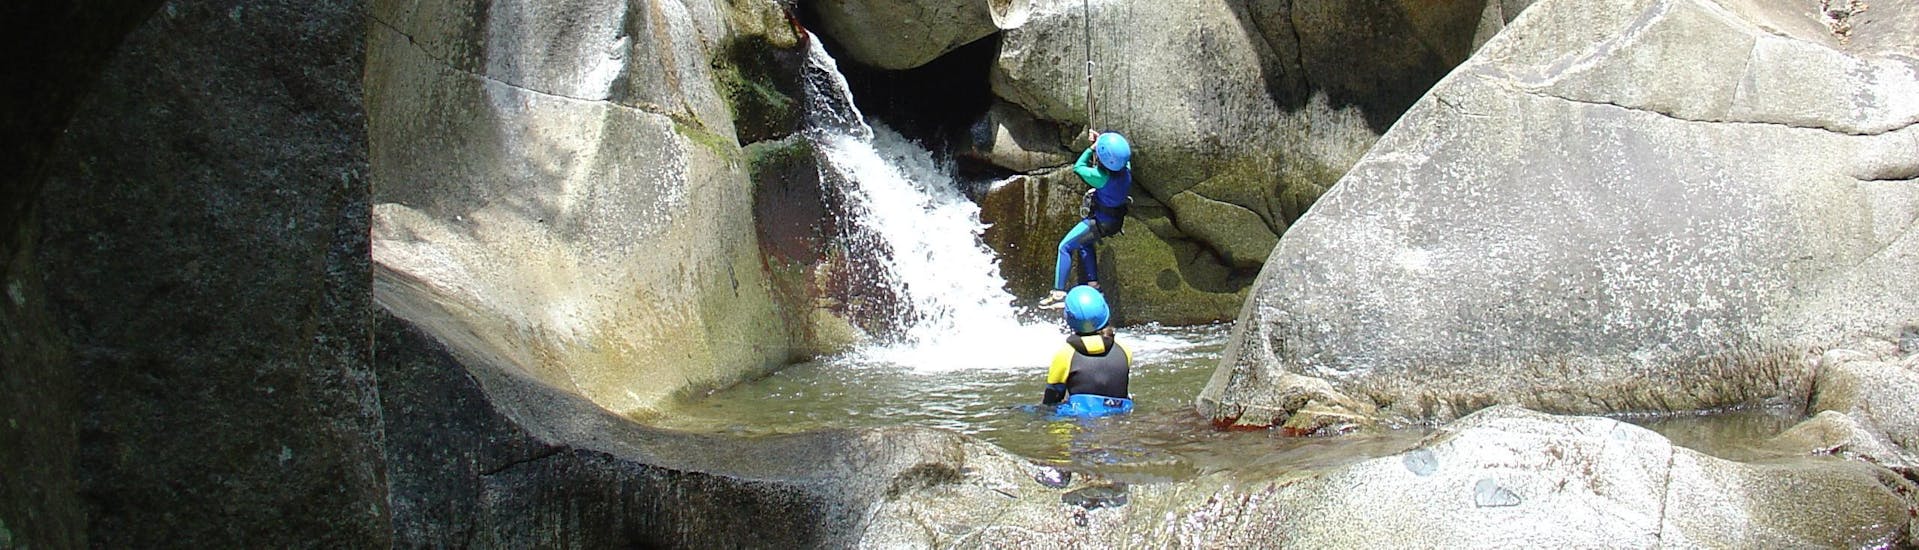 A group is enjoying the Canyoning in Canyon de Molitg Les Bains - Spa Cocoon activity operated by Extérieur Nature.